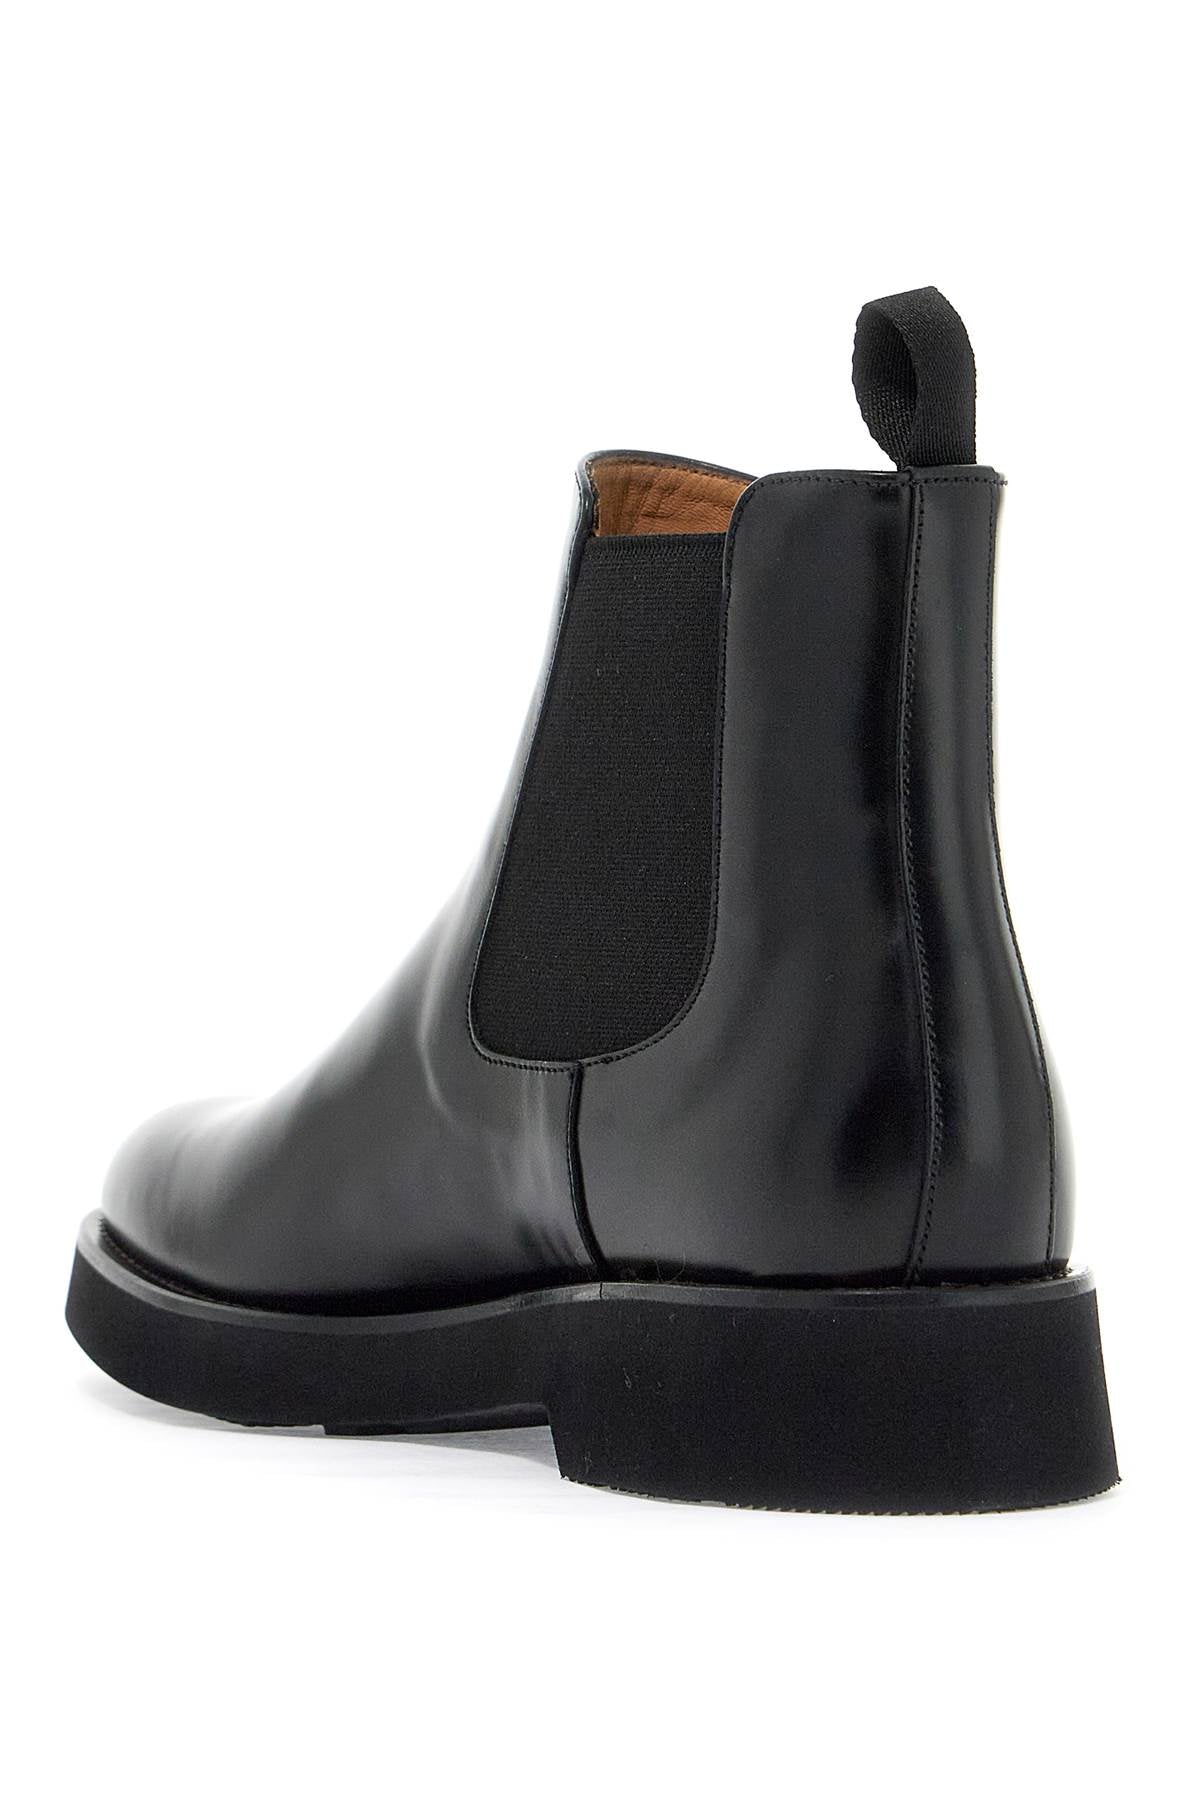 CHURCH'S MONMOUTH CHELSEA LEATHER BRUSHED ANKLE BOOTS